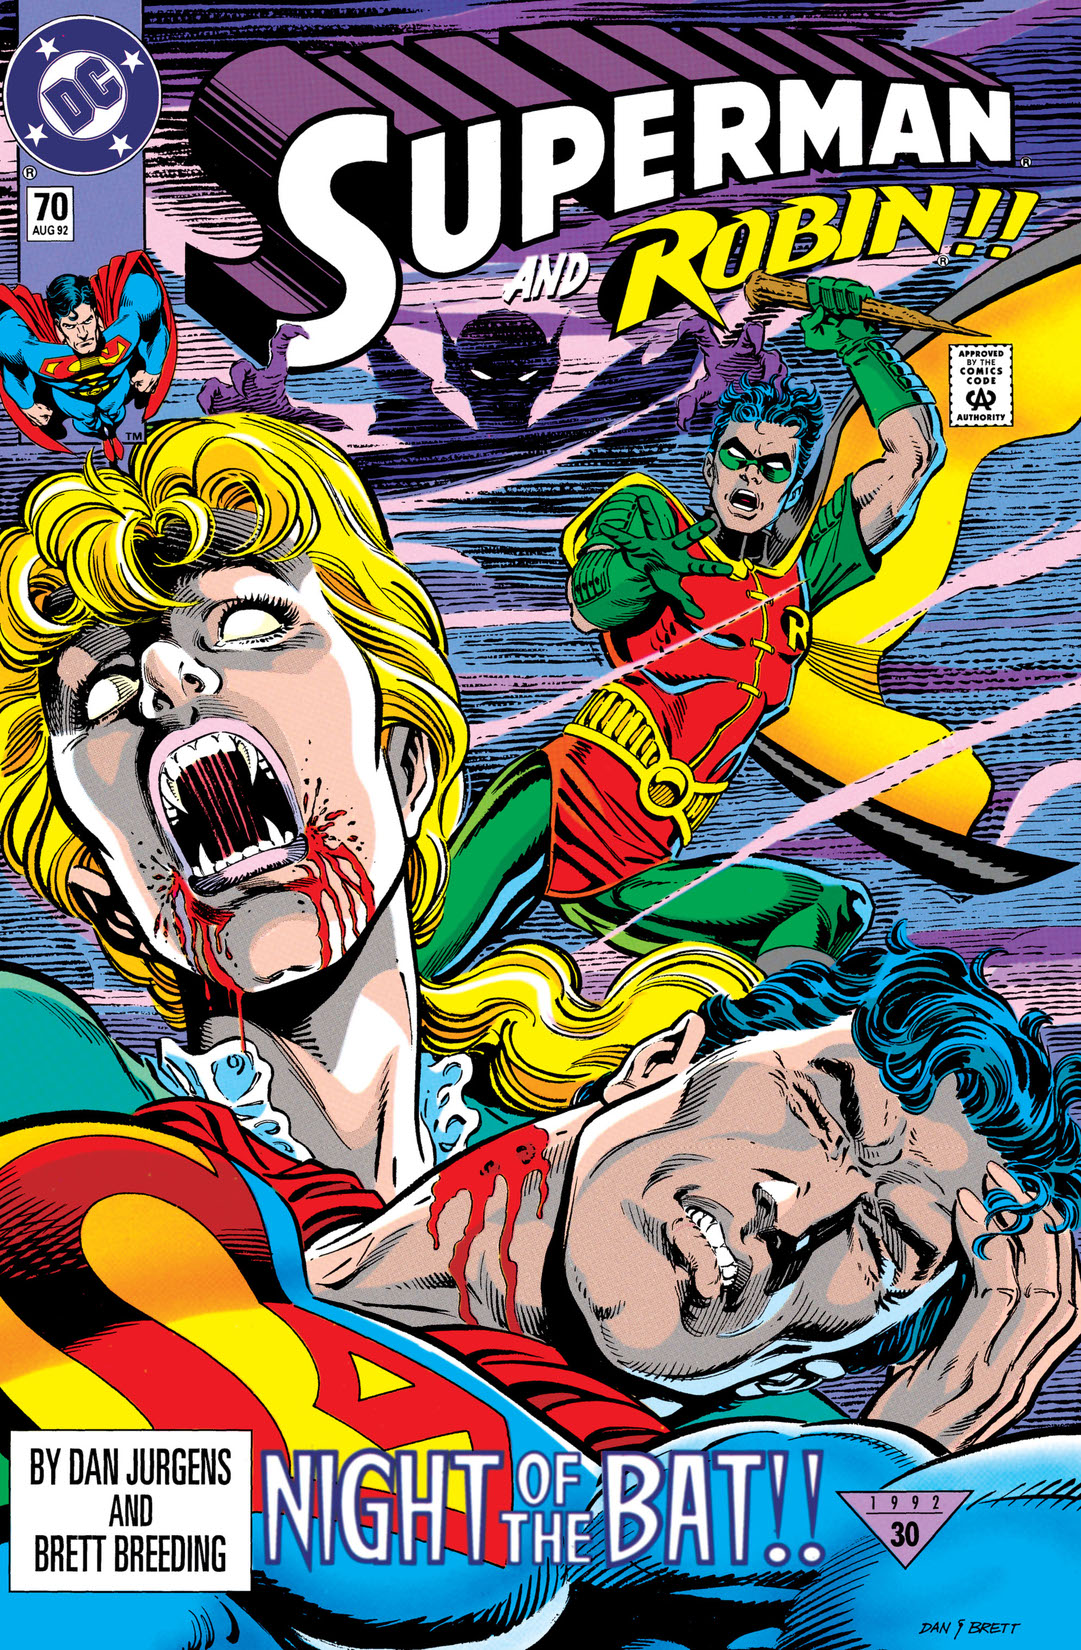 Superman (1986-) #70 preview images